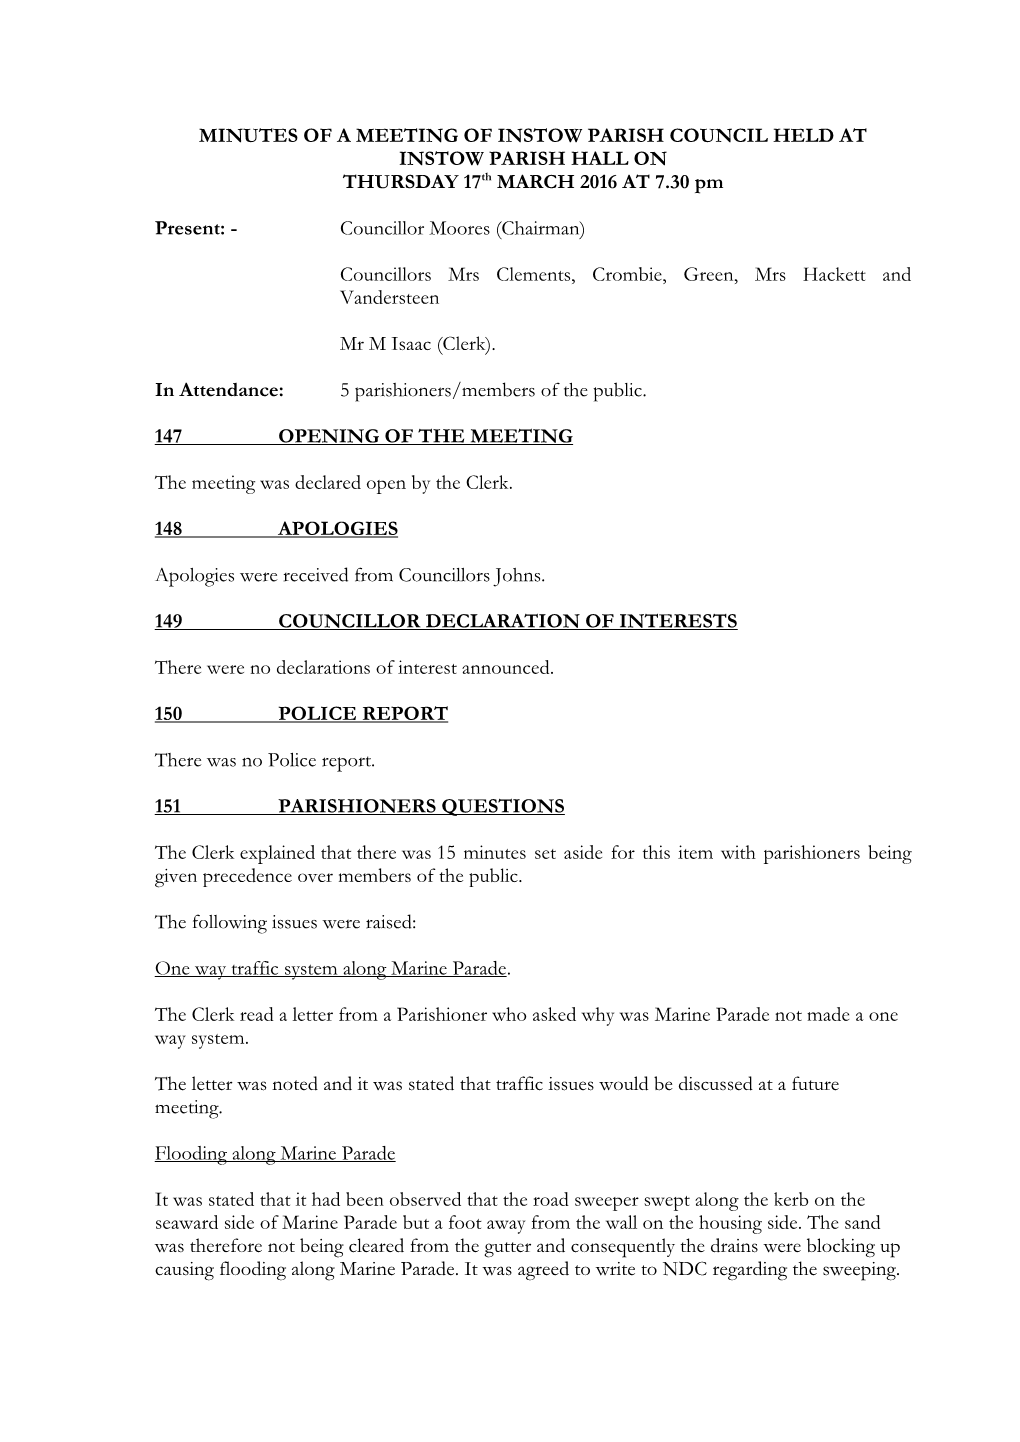 COUNCIL HELD at INSTOW PARISH HALL on THURSDAY 17Th MARCH 2016 at 7.30 Pm